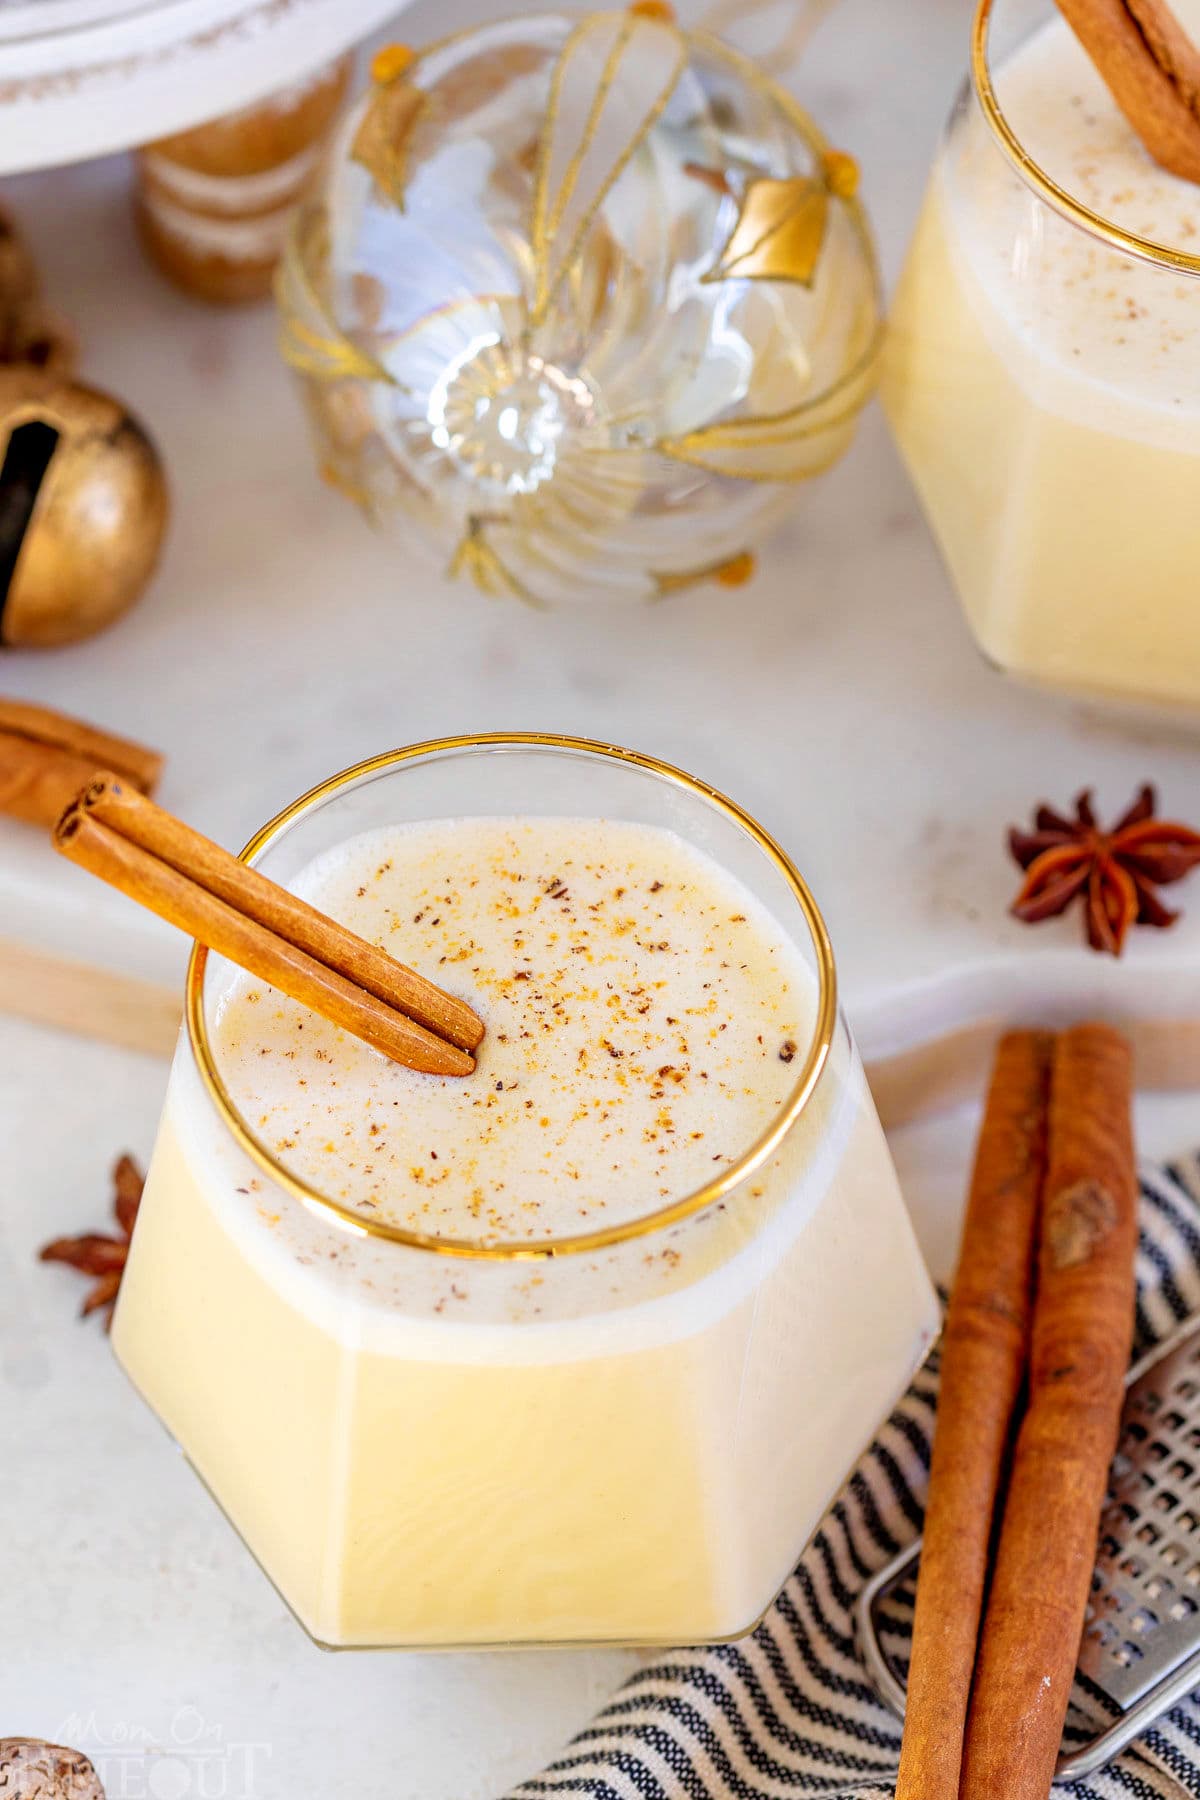 gold rimmed short glass filled with homemade eggnog with freshly grated nutmeg on top and a cinnamon stick as a garnish. another glass can be seen in the background.